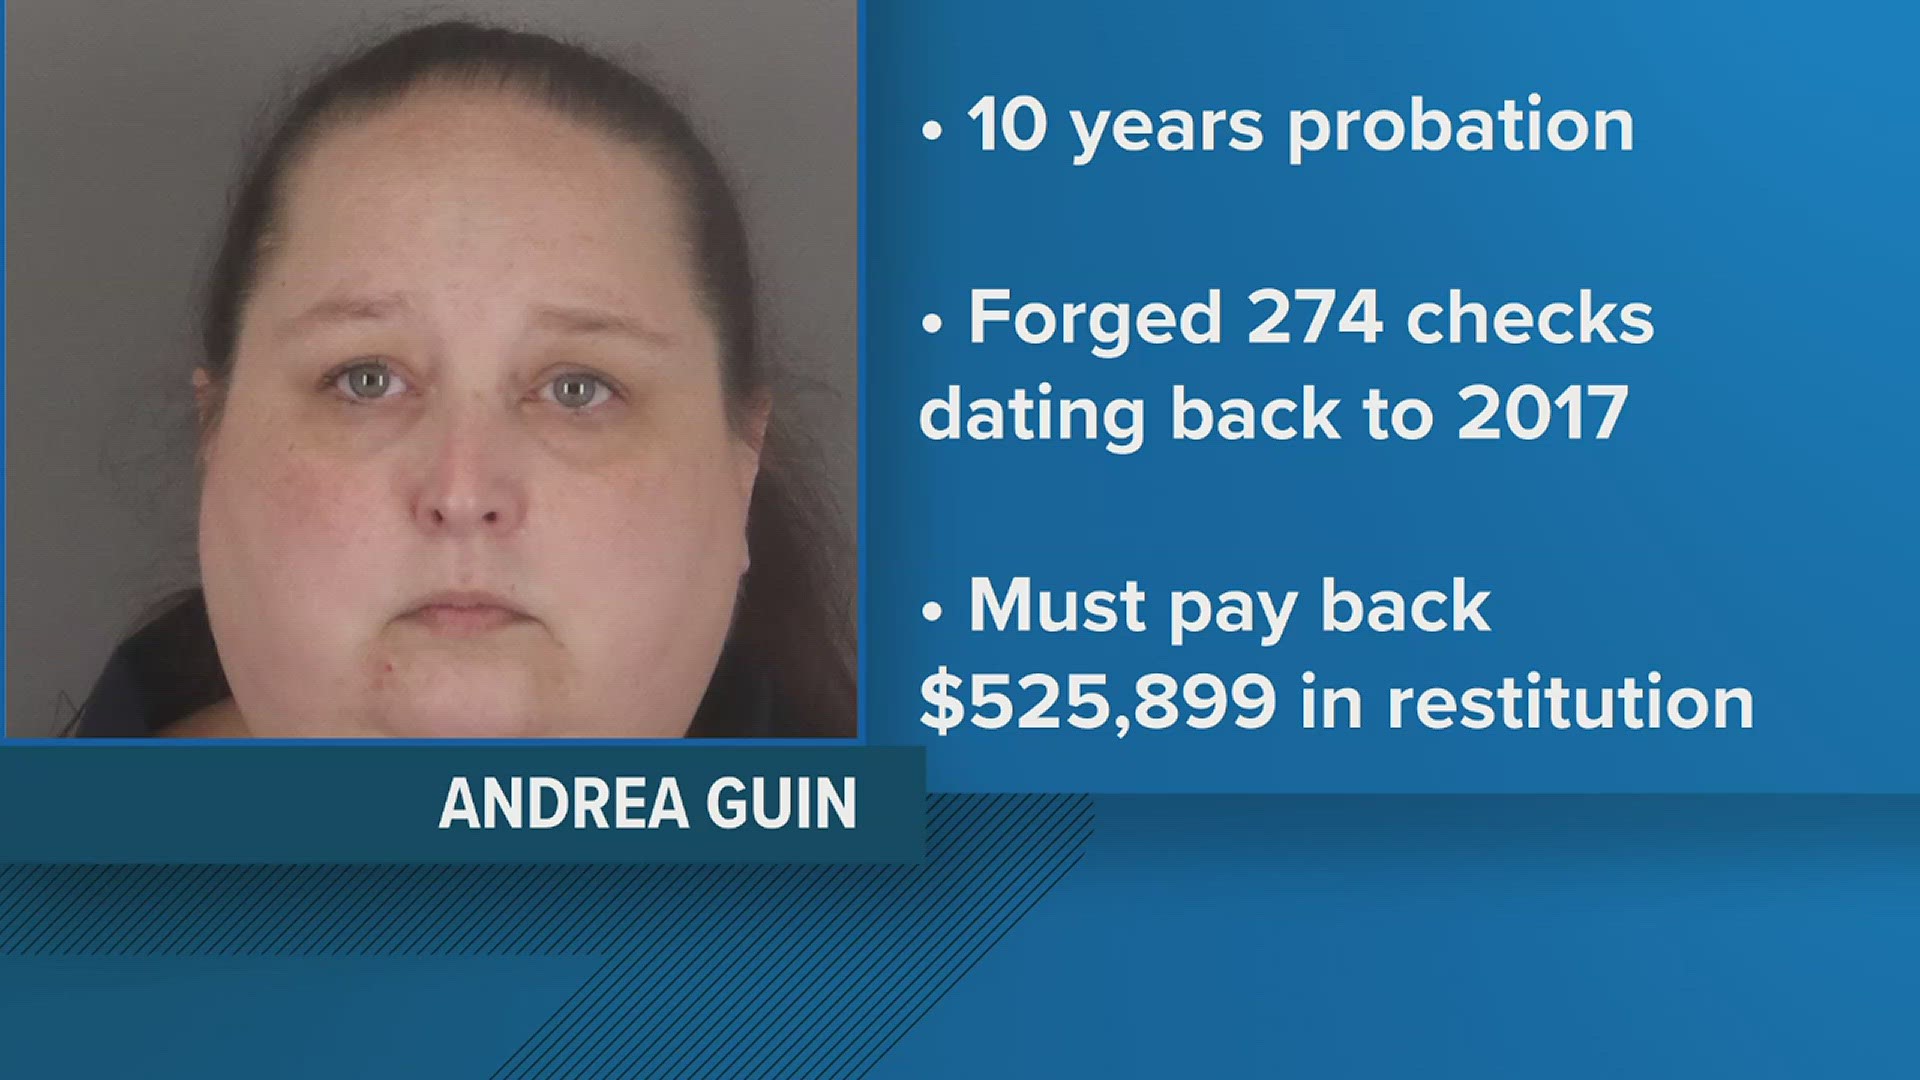 It was discovered that from 2017 to 2020, Andrea Patterson Guin, 45, had written herself 274 checks totaling $525,899.65 from her employer, Diers and Stark LLC.